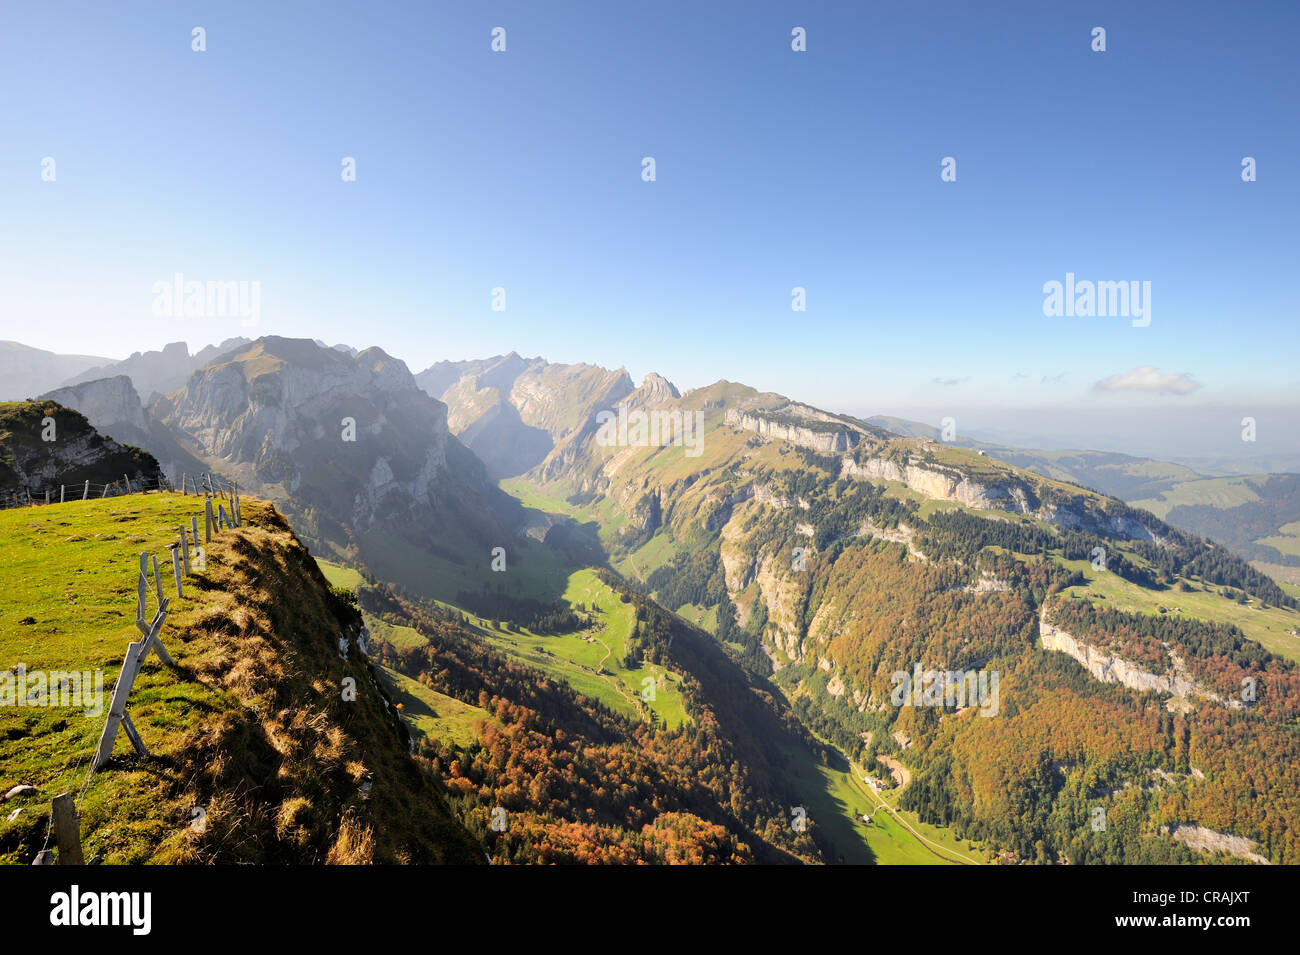 View down from the high plateau Alp Sigel, 1730 m, towards Wasserauen in the Appenzell Alps, with Ebenalp Mountain on the right Stock Photo